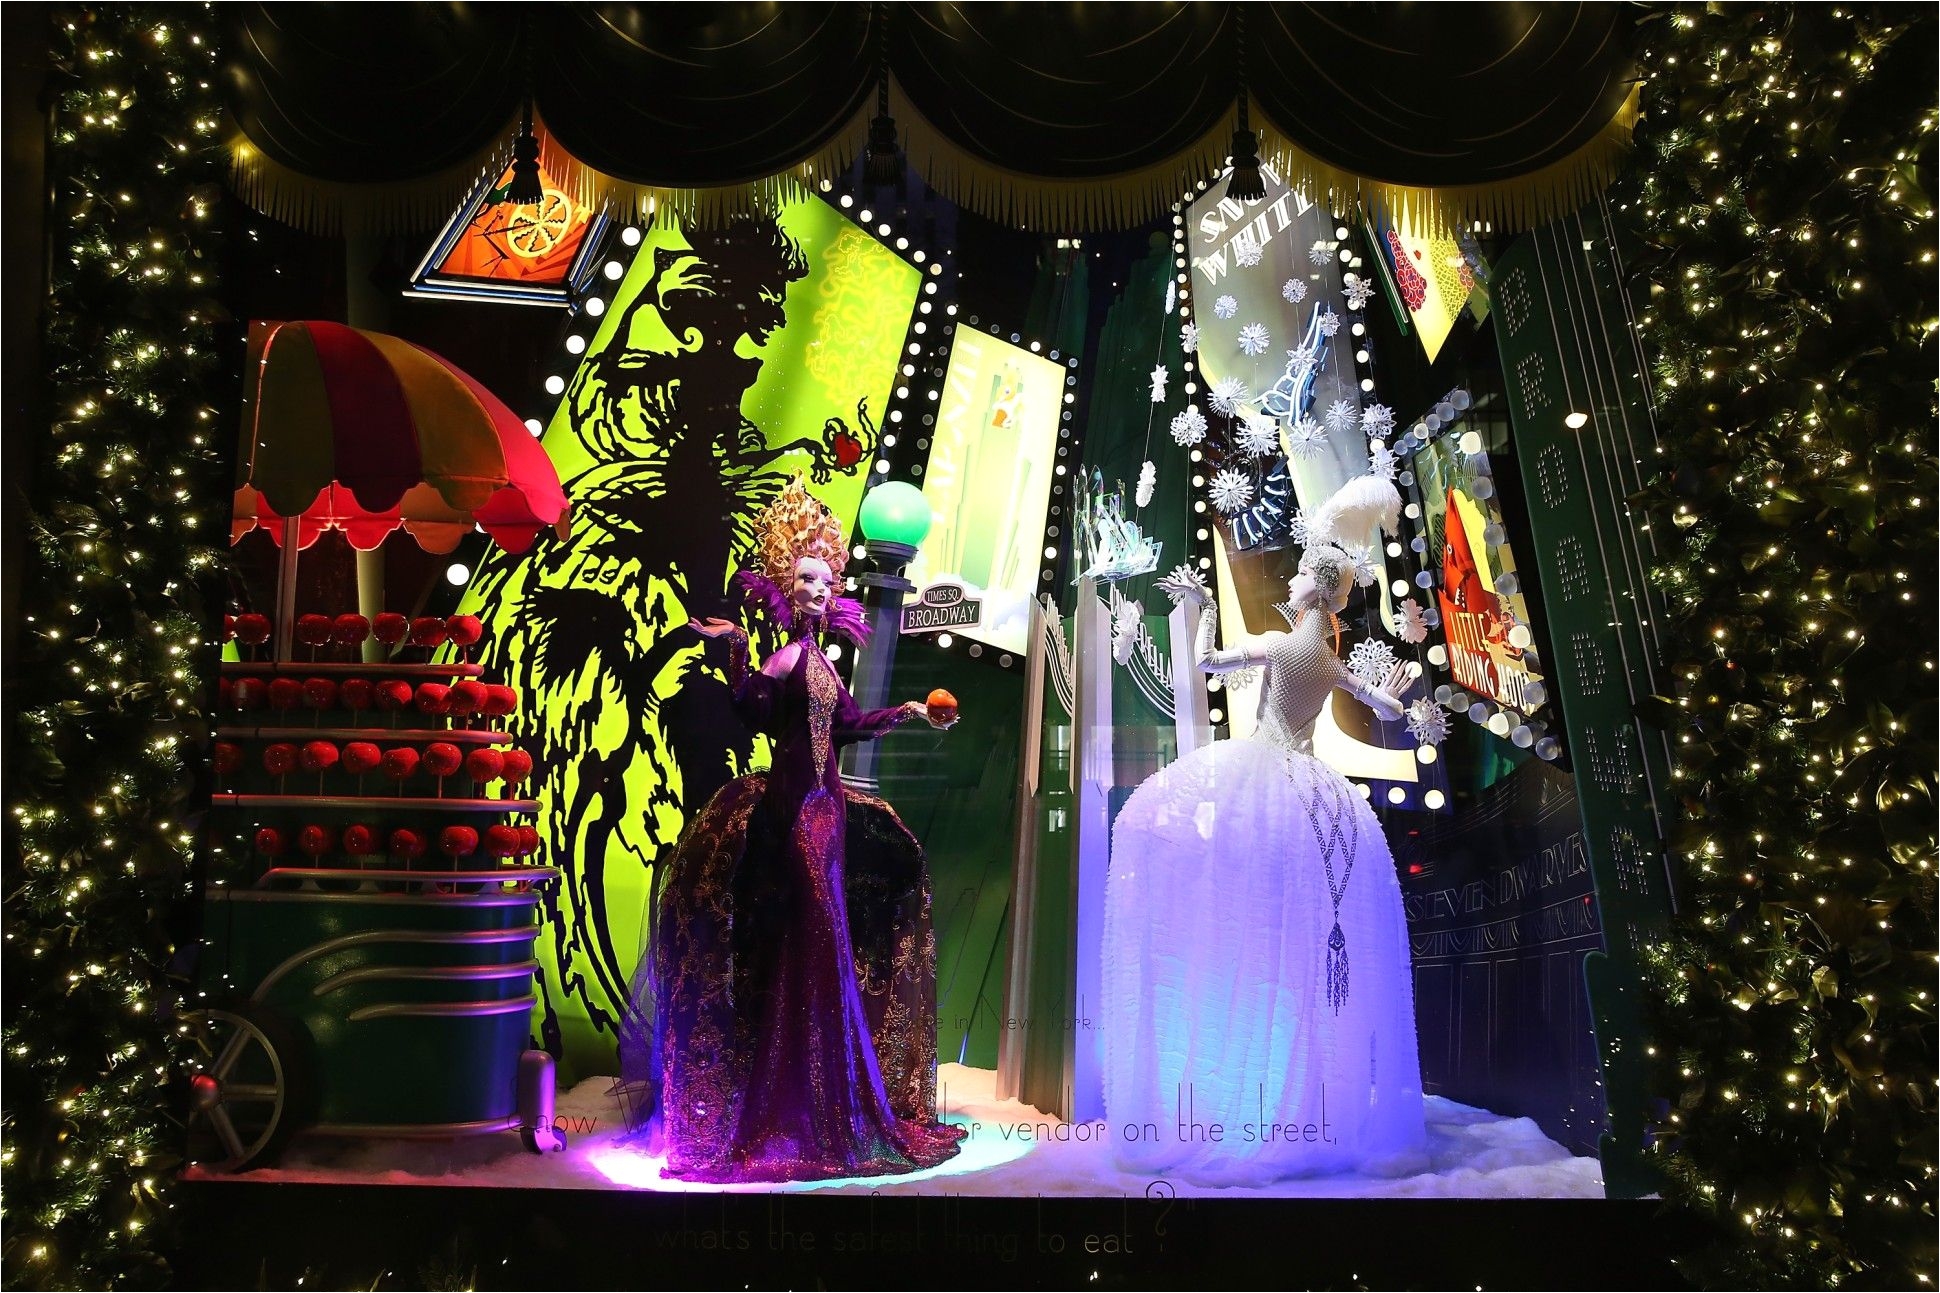 saks fifth avenues window displays in new york city this season are themed on classic fairy tales but in art deco style description from dailyherald com